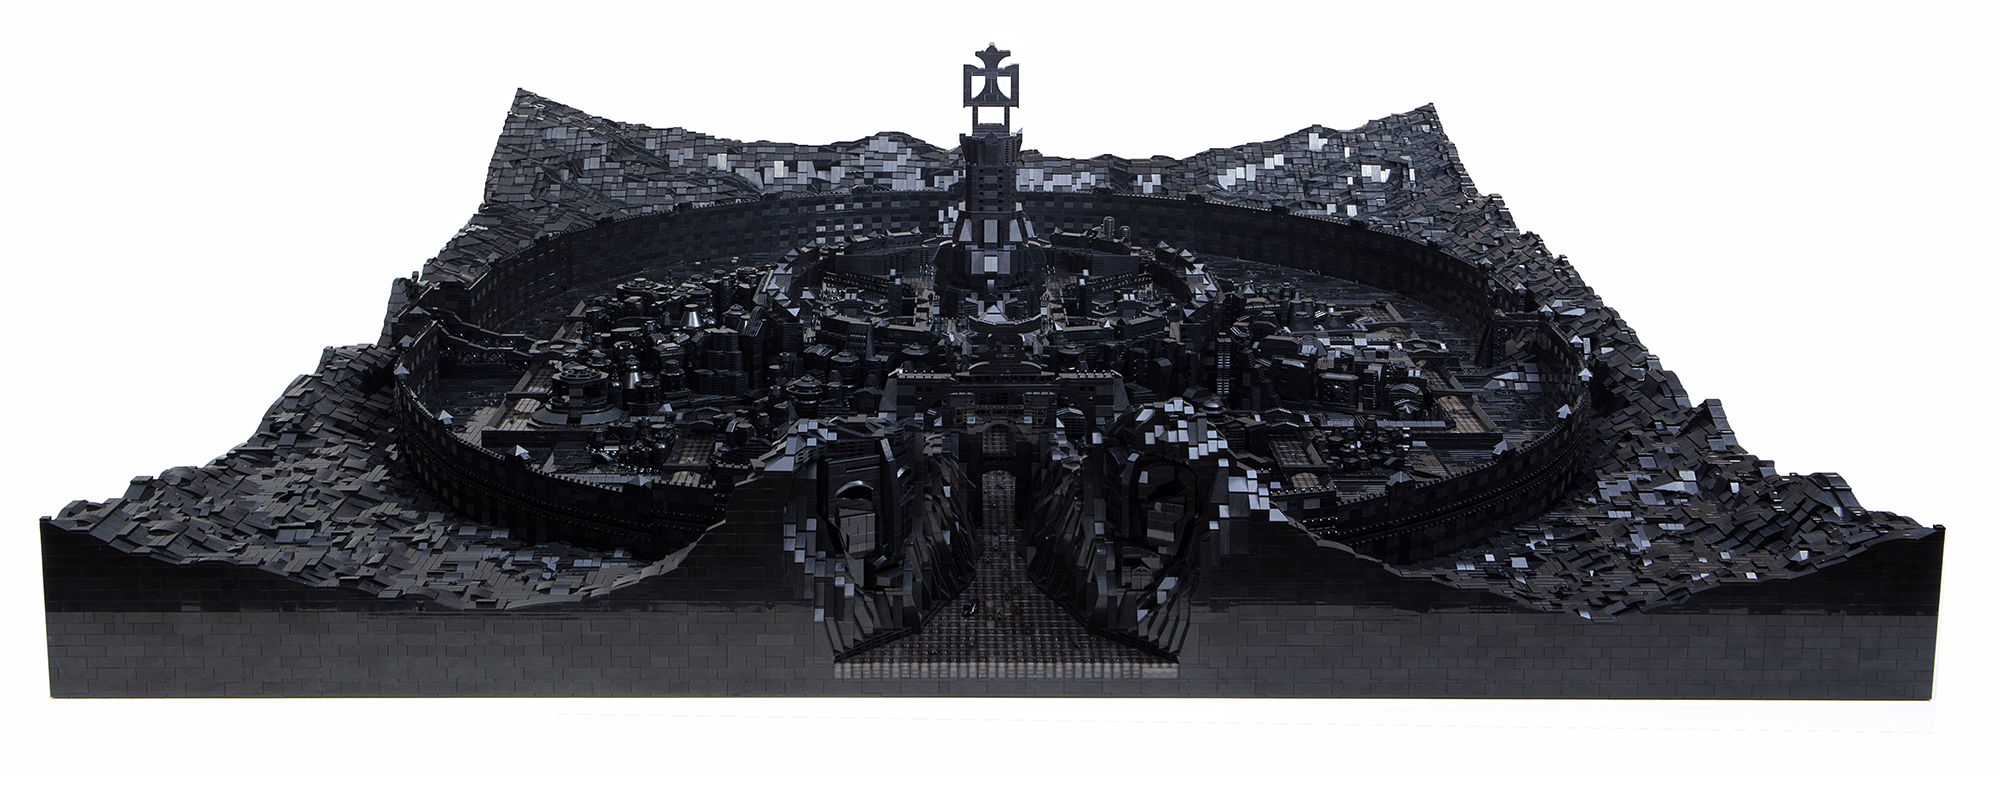 1618938673 56 Elaborately Constructed LEGO Universes by Artist Ekow Nimako Envision an